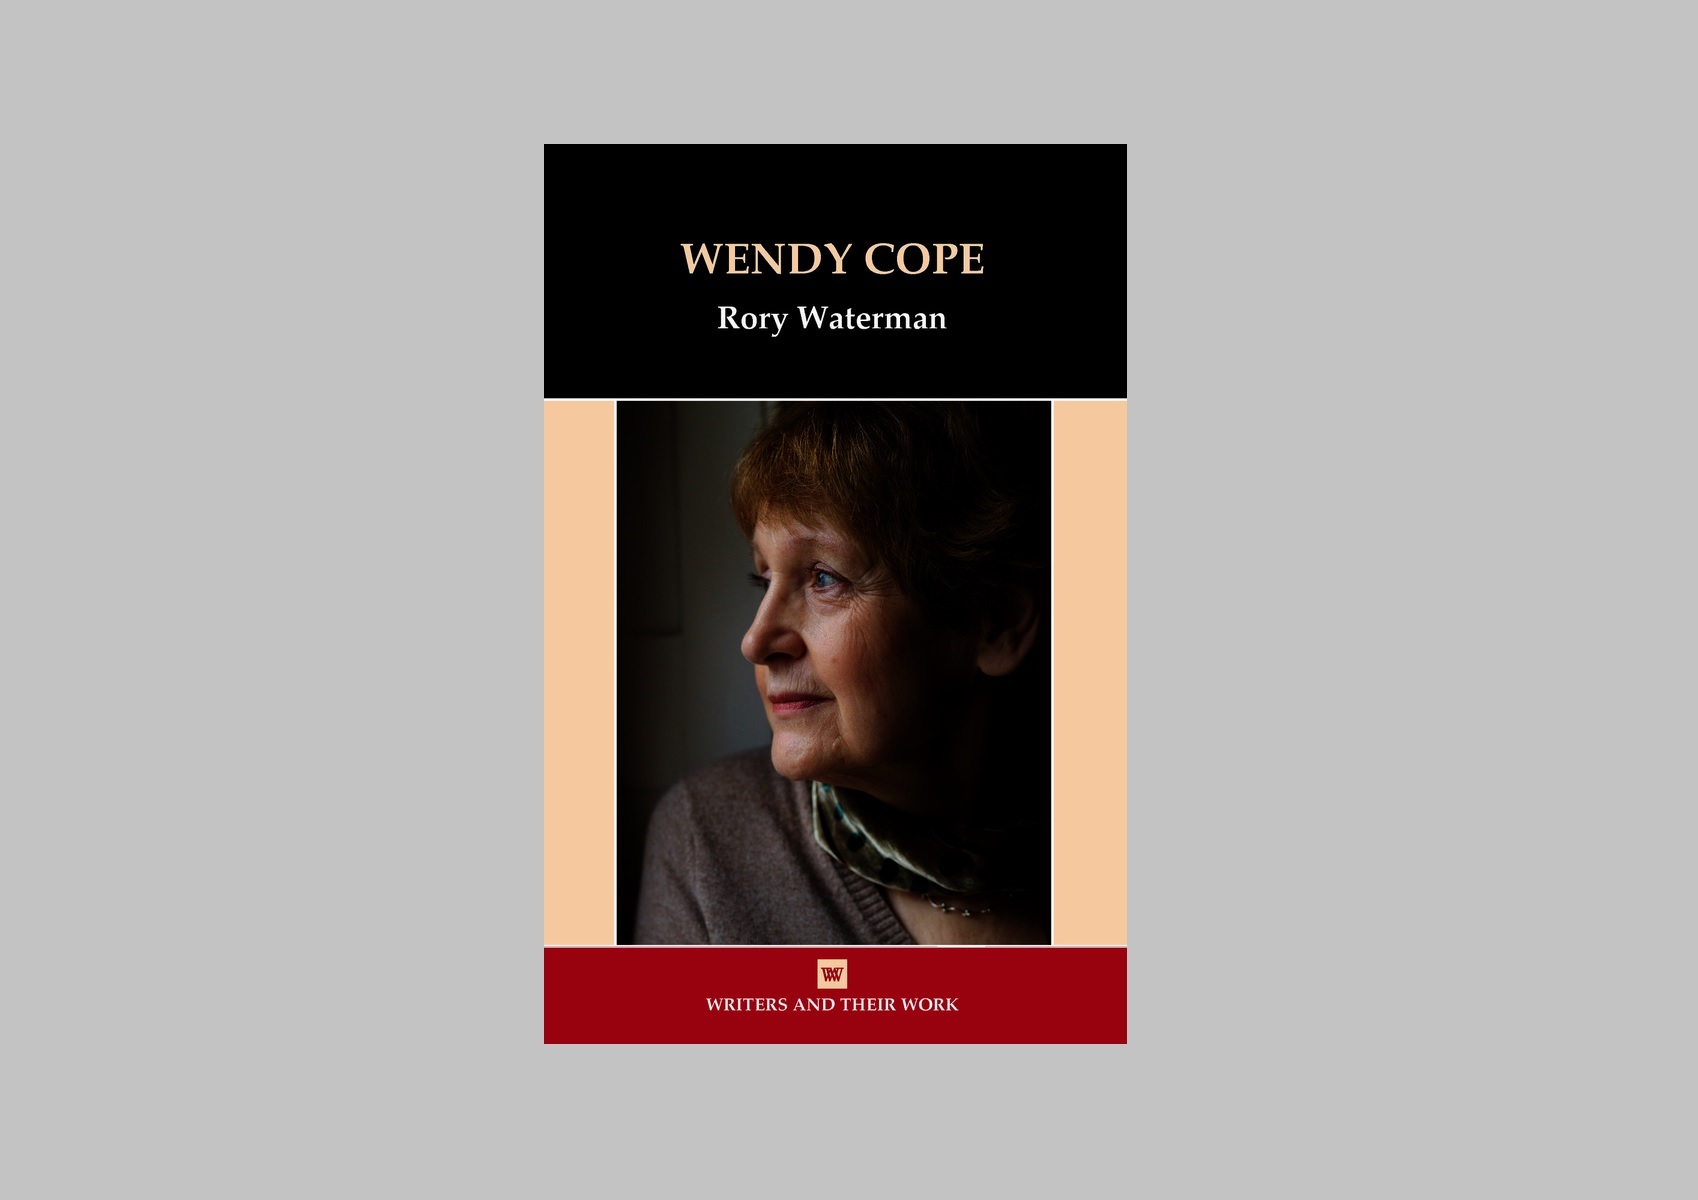 An excerpt from ‘Wendy Cope’ by Rory Waterman: on her ‘Saint Hilda of Whitby’